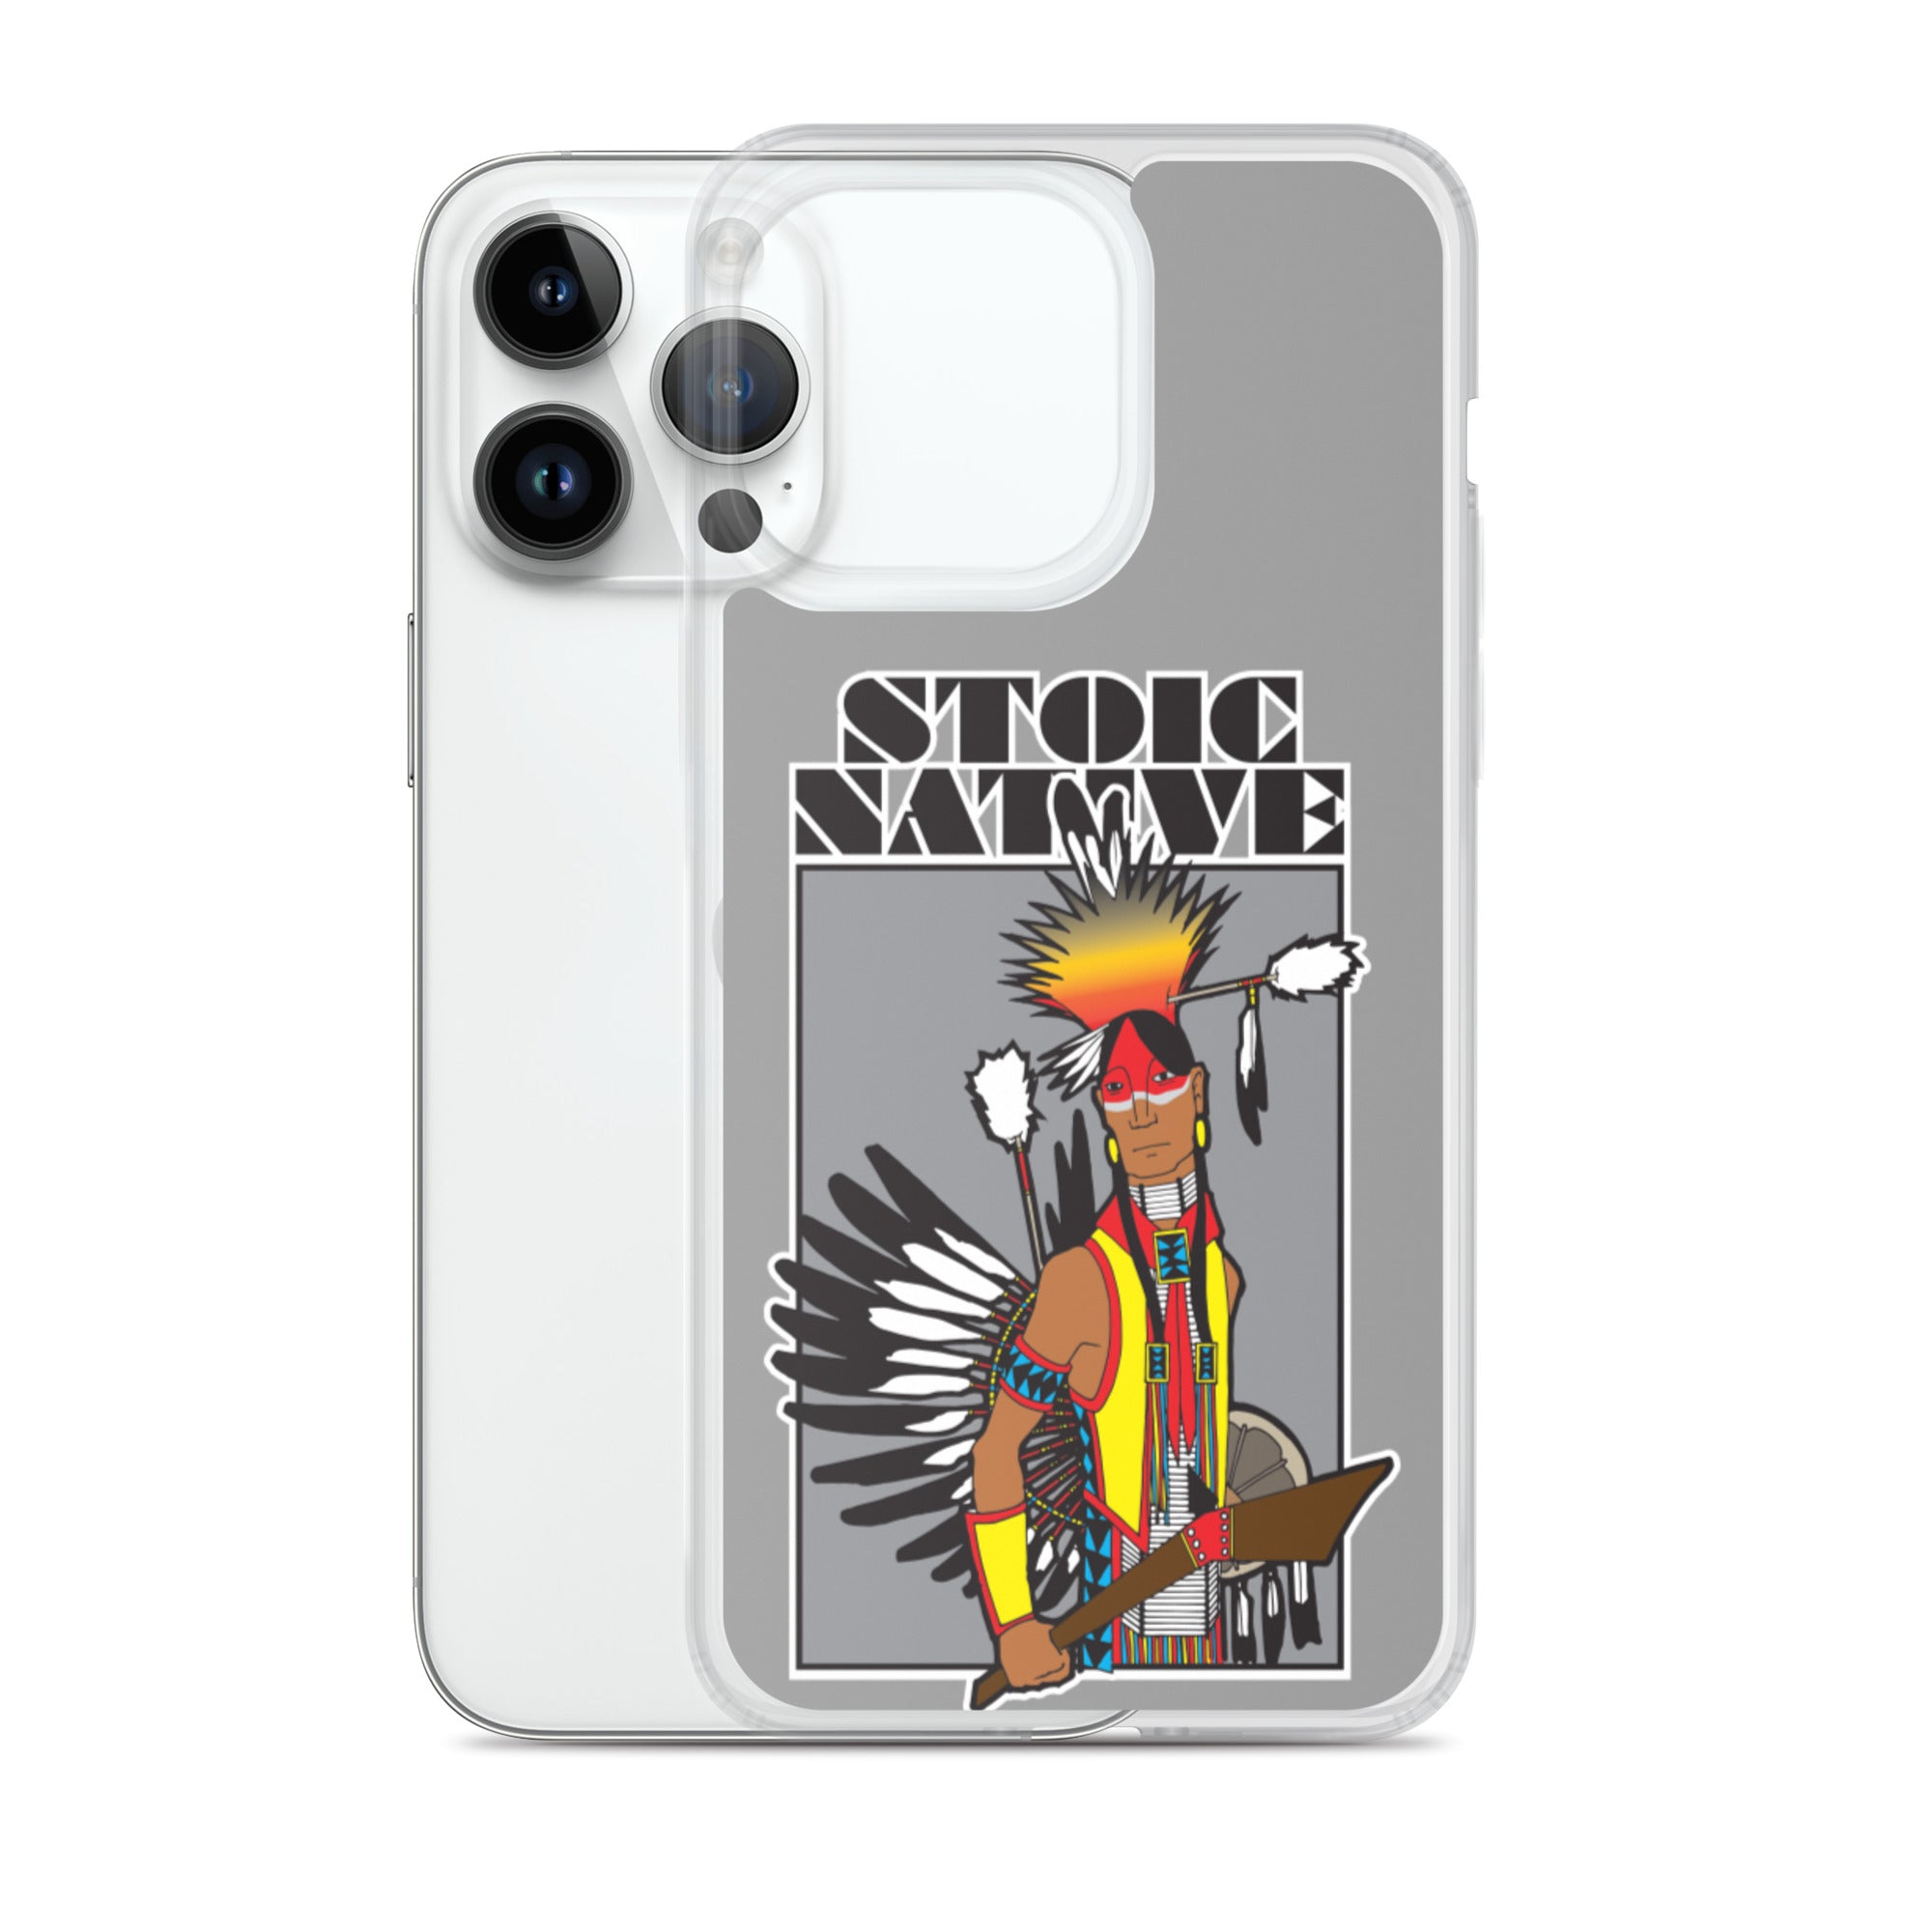 Traditional Dancer iPhone Case